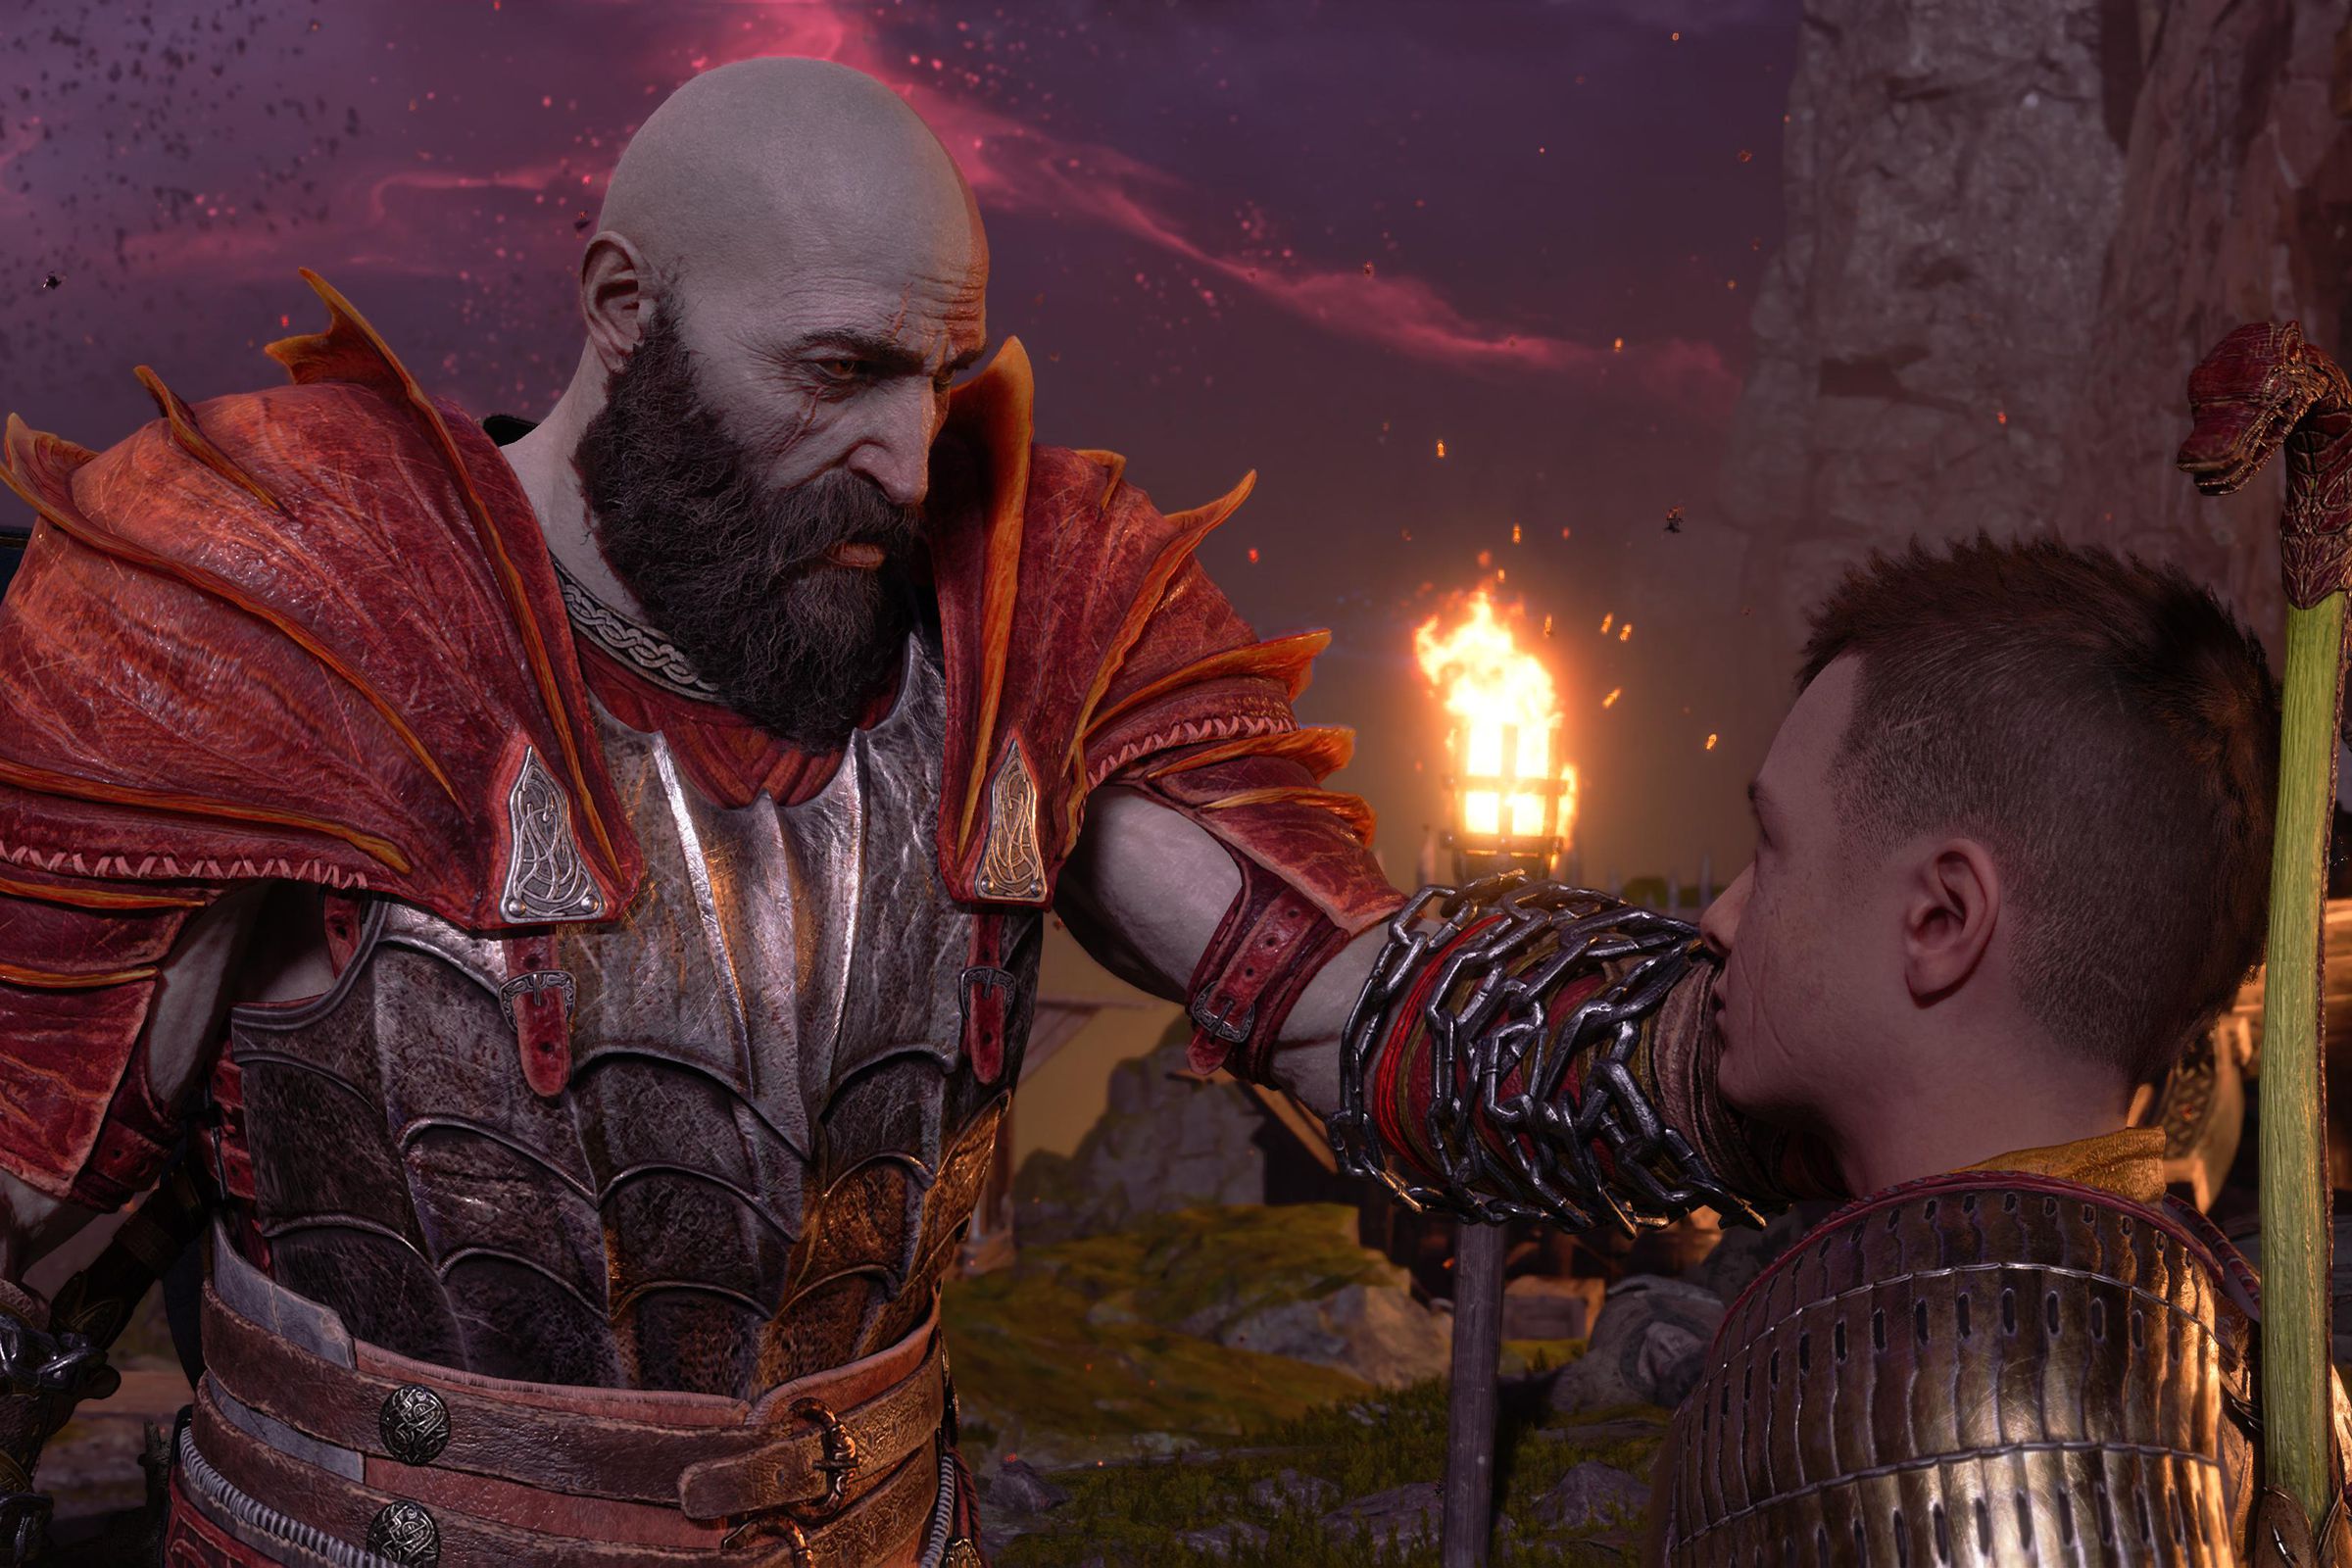 Screenshot from God of War Ragnarök featuring Kratos gently touching the face of his son, Atreus, in comfort